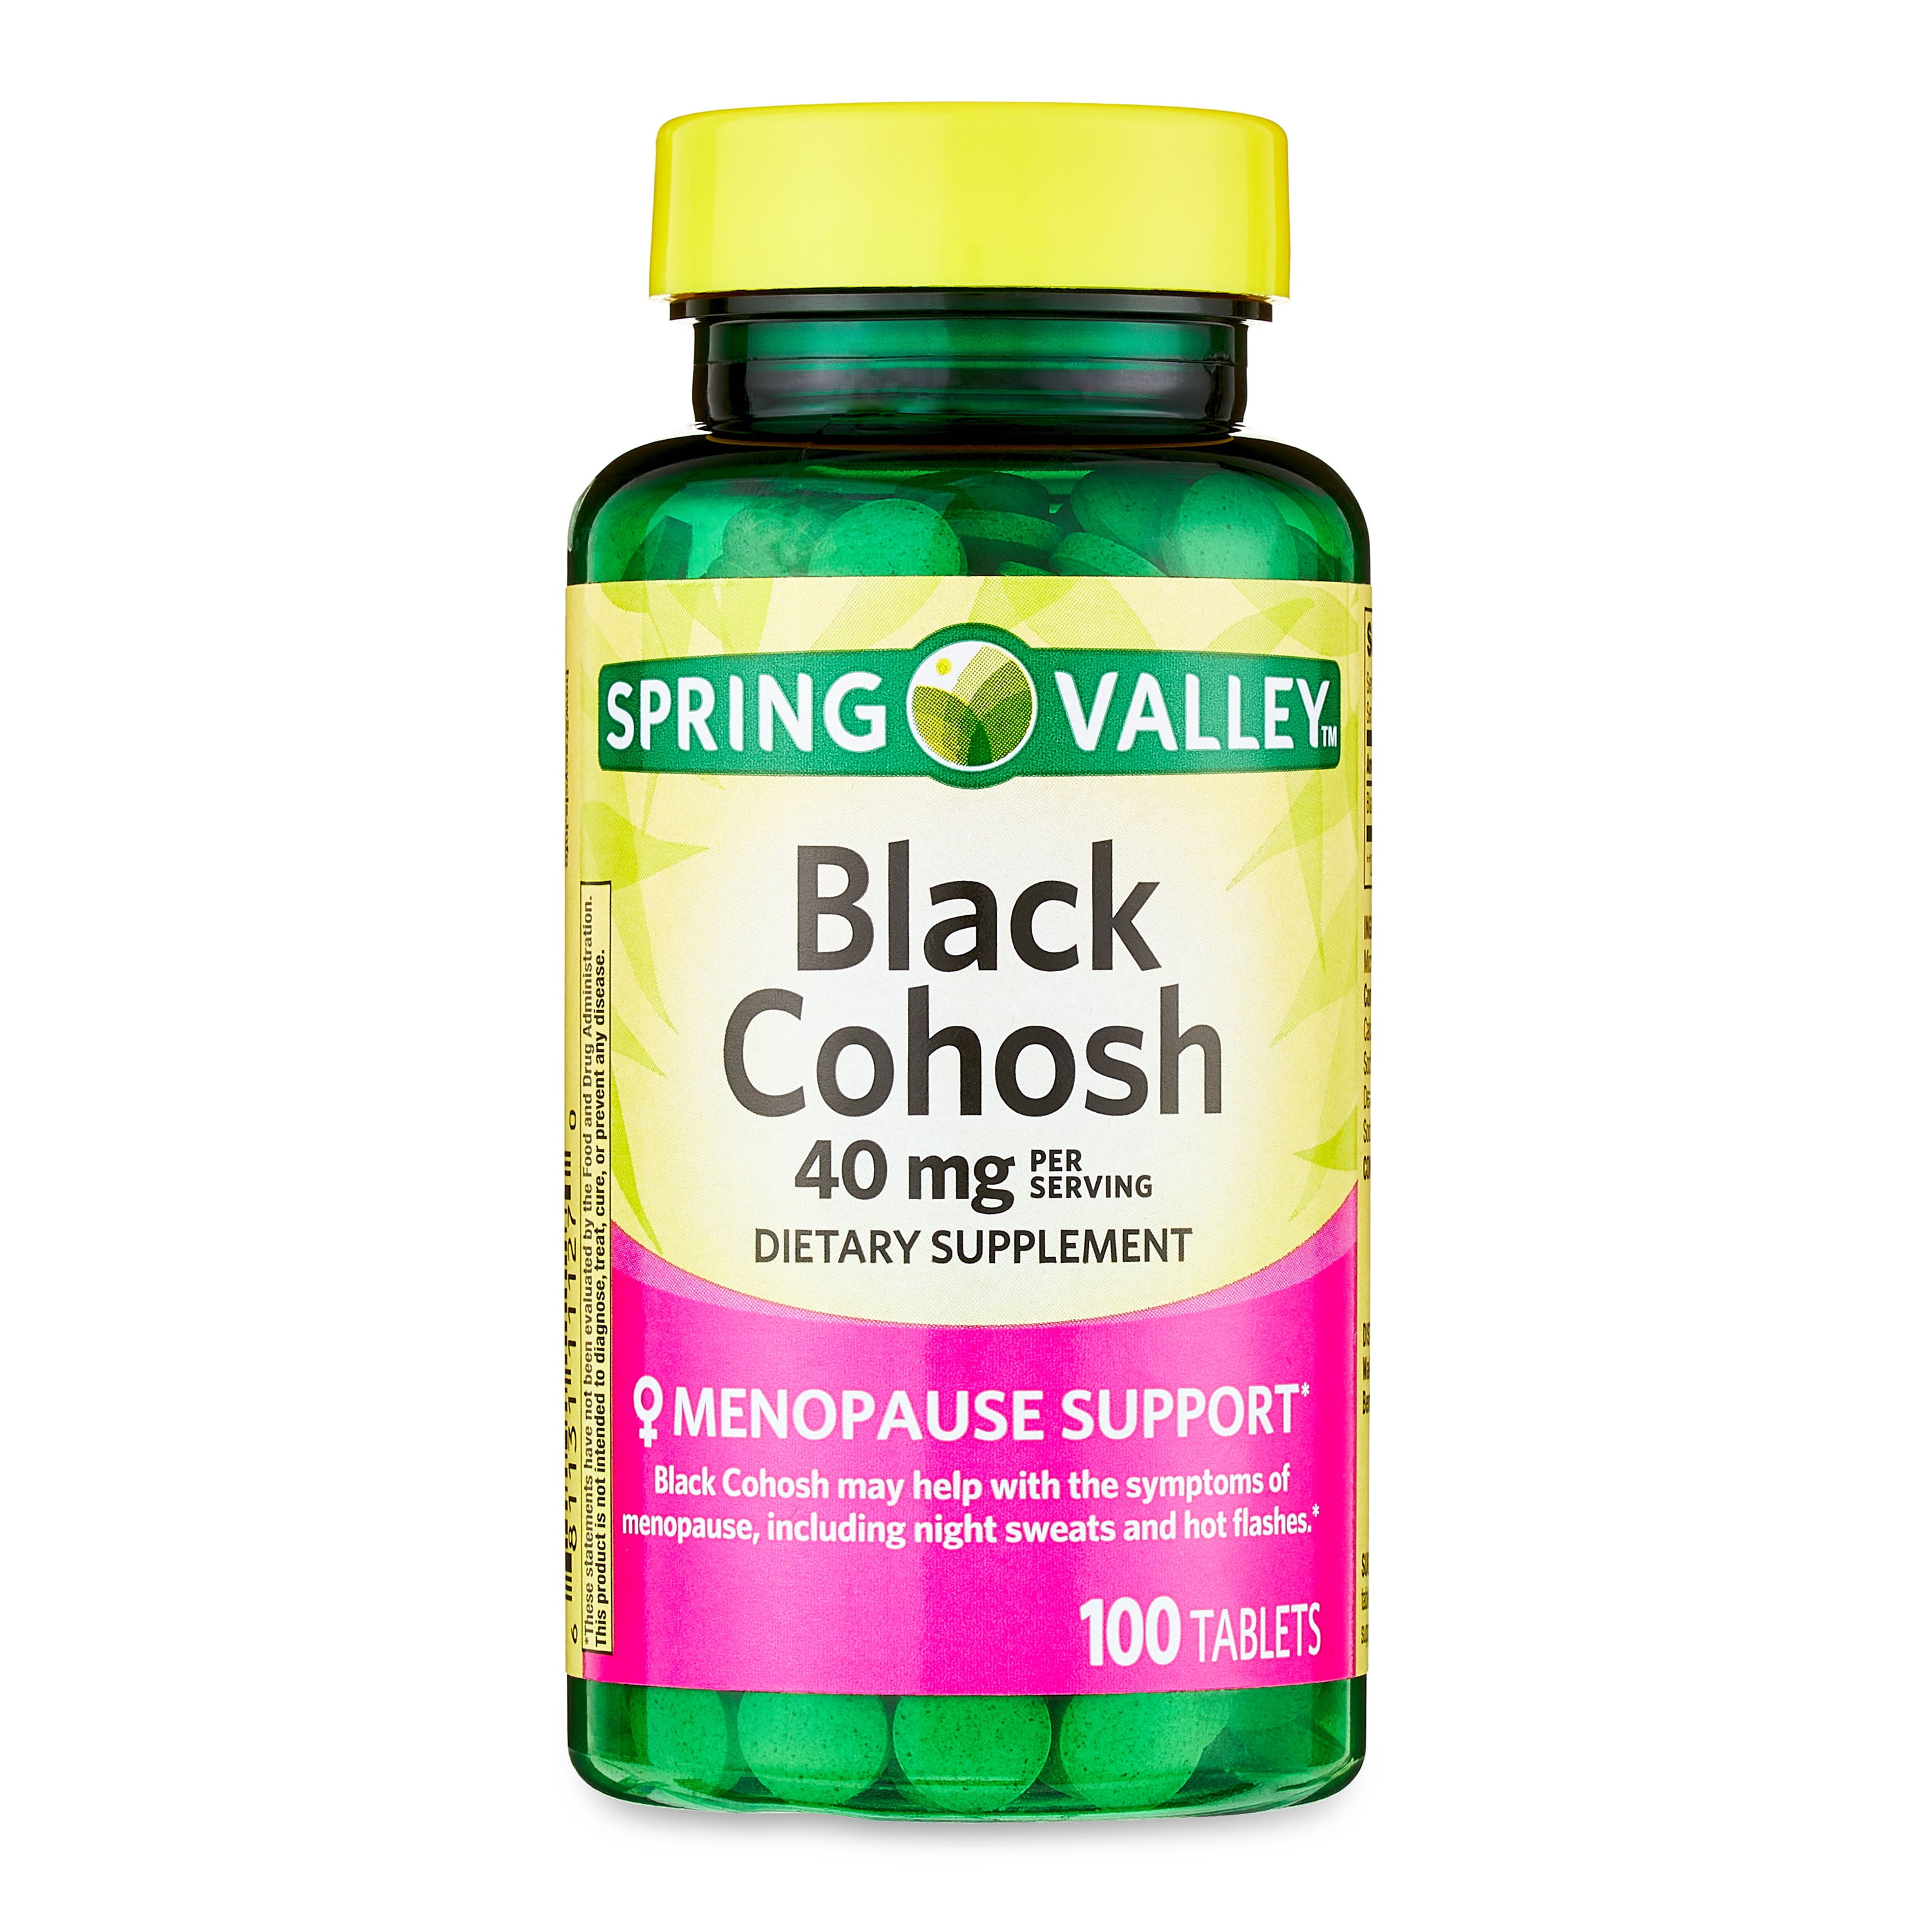 Spring Valley Black Cohosh Tablets Dietary Supplement, 40 mg, 100 Count